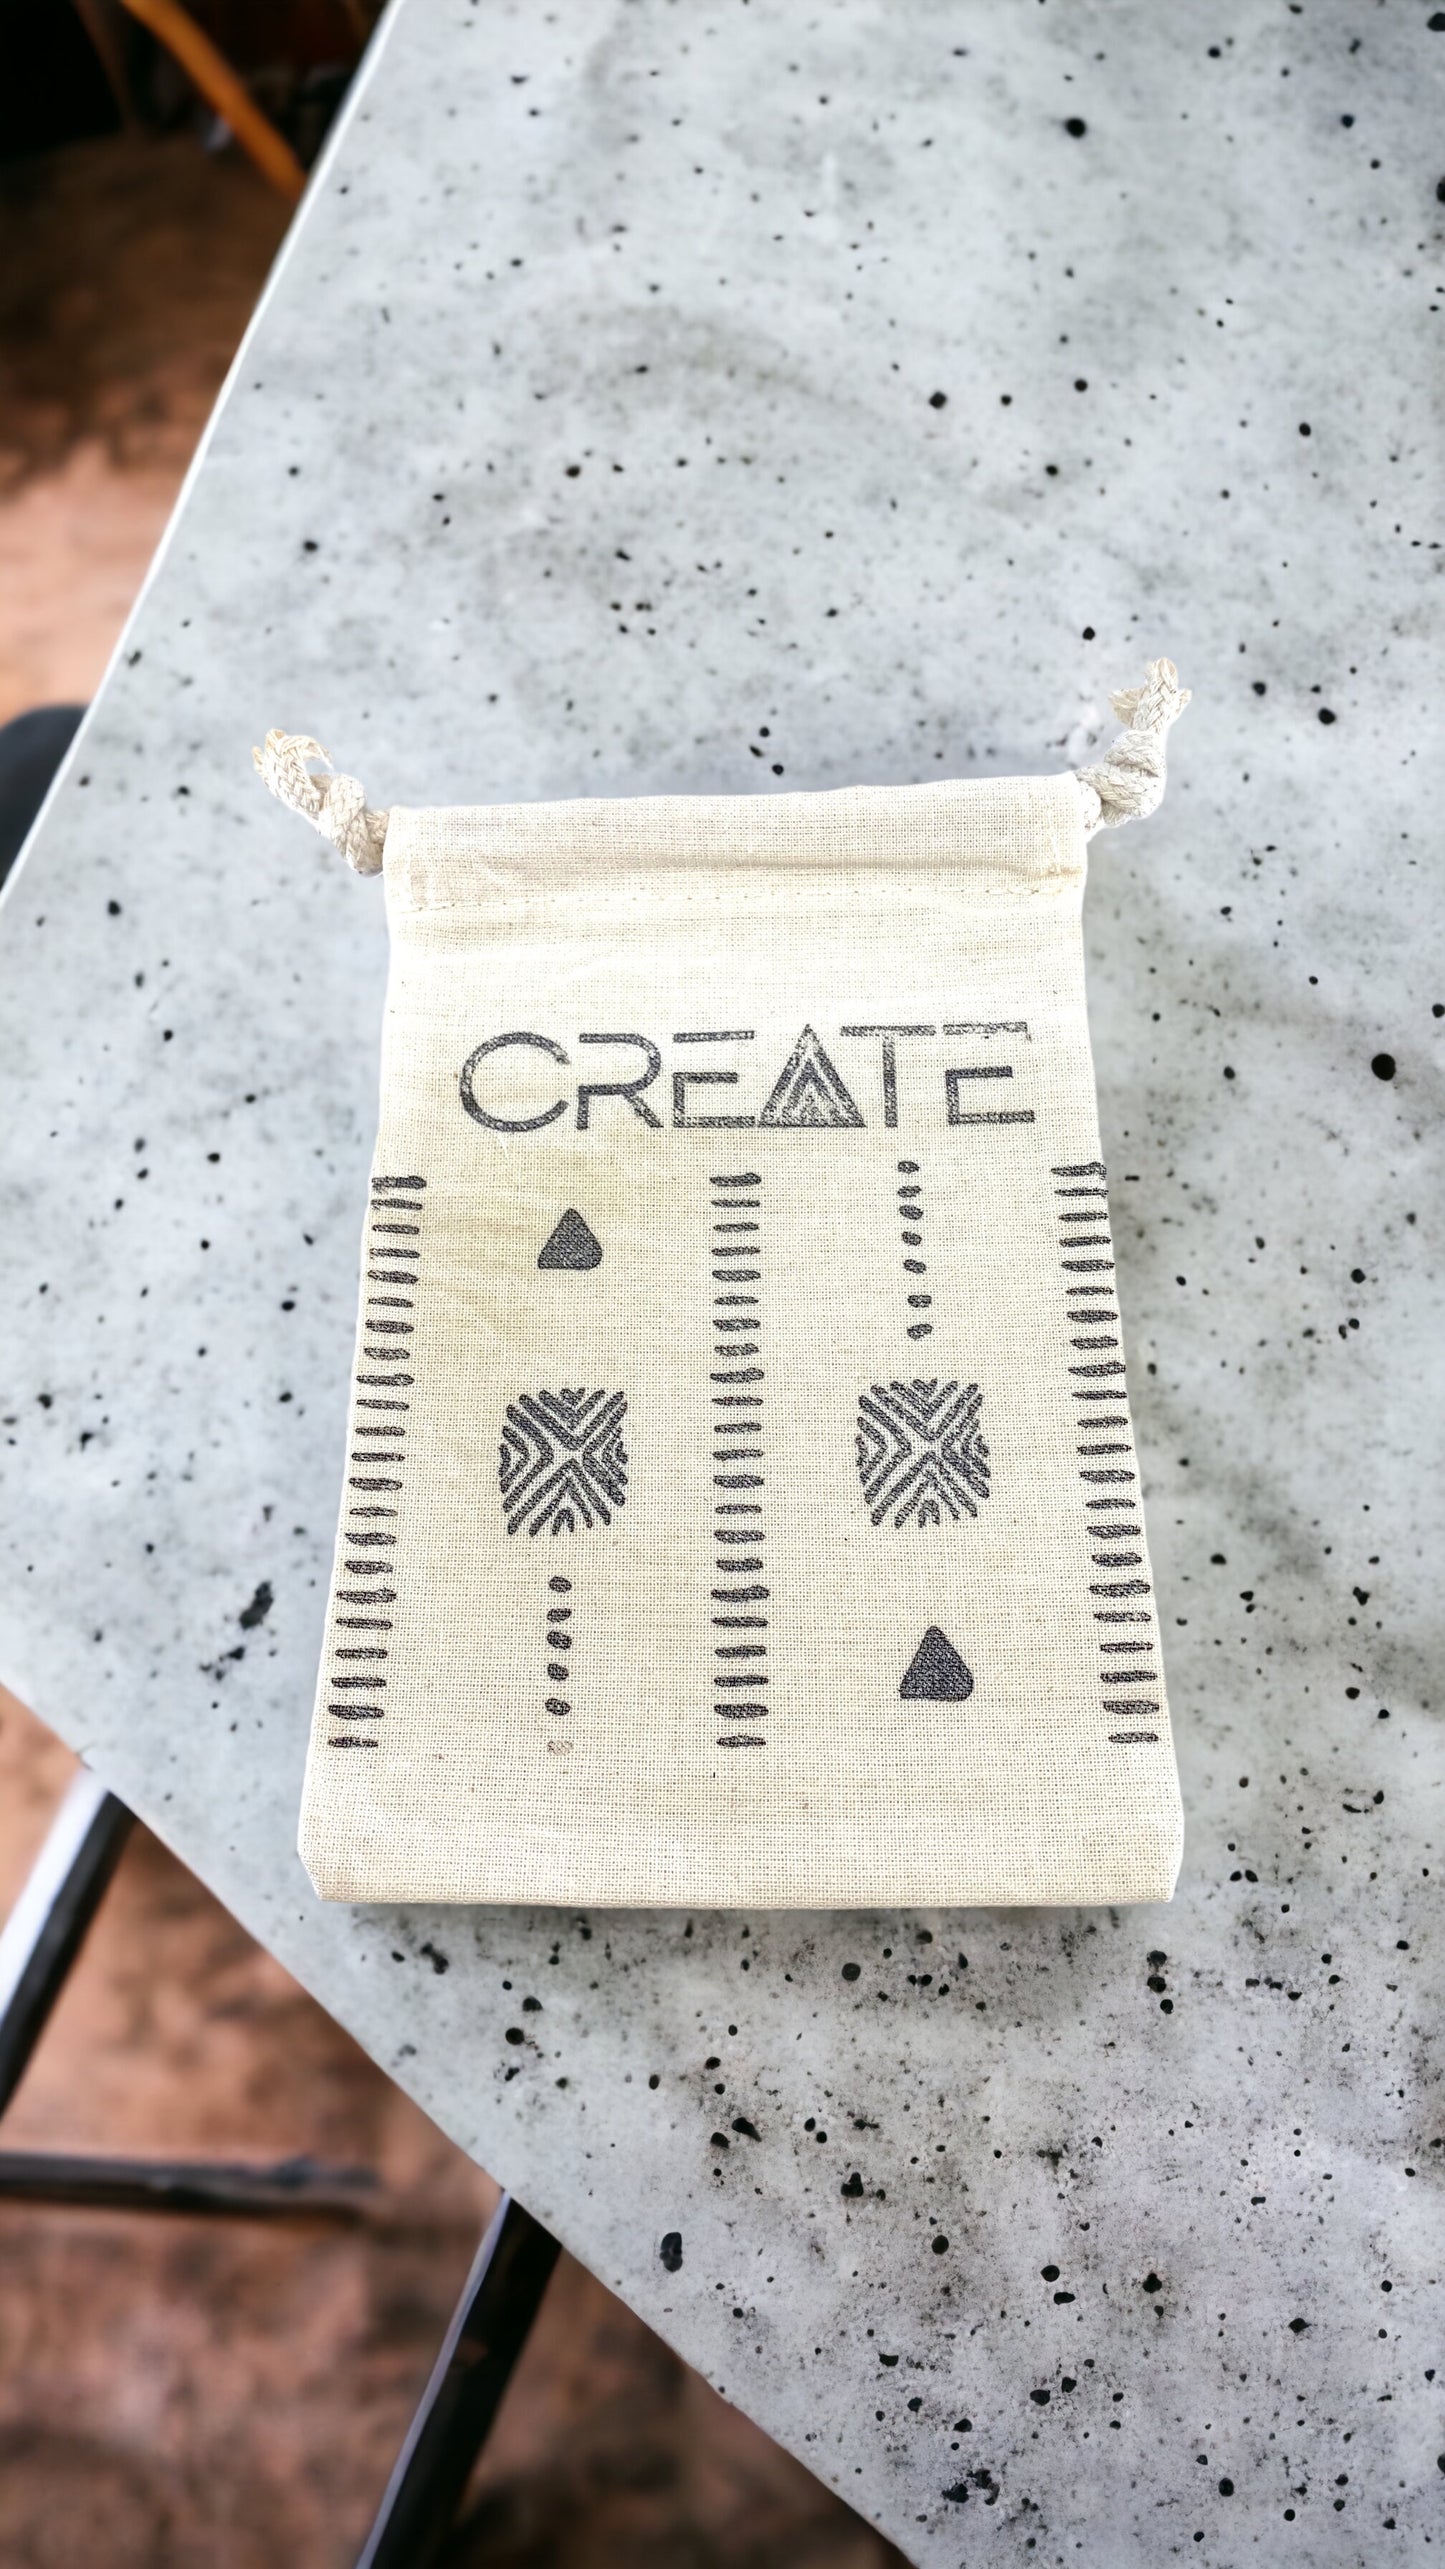 Hand Stamped, Create, Cotton Drawstring Pouches 4" x 6"